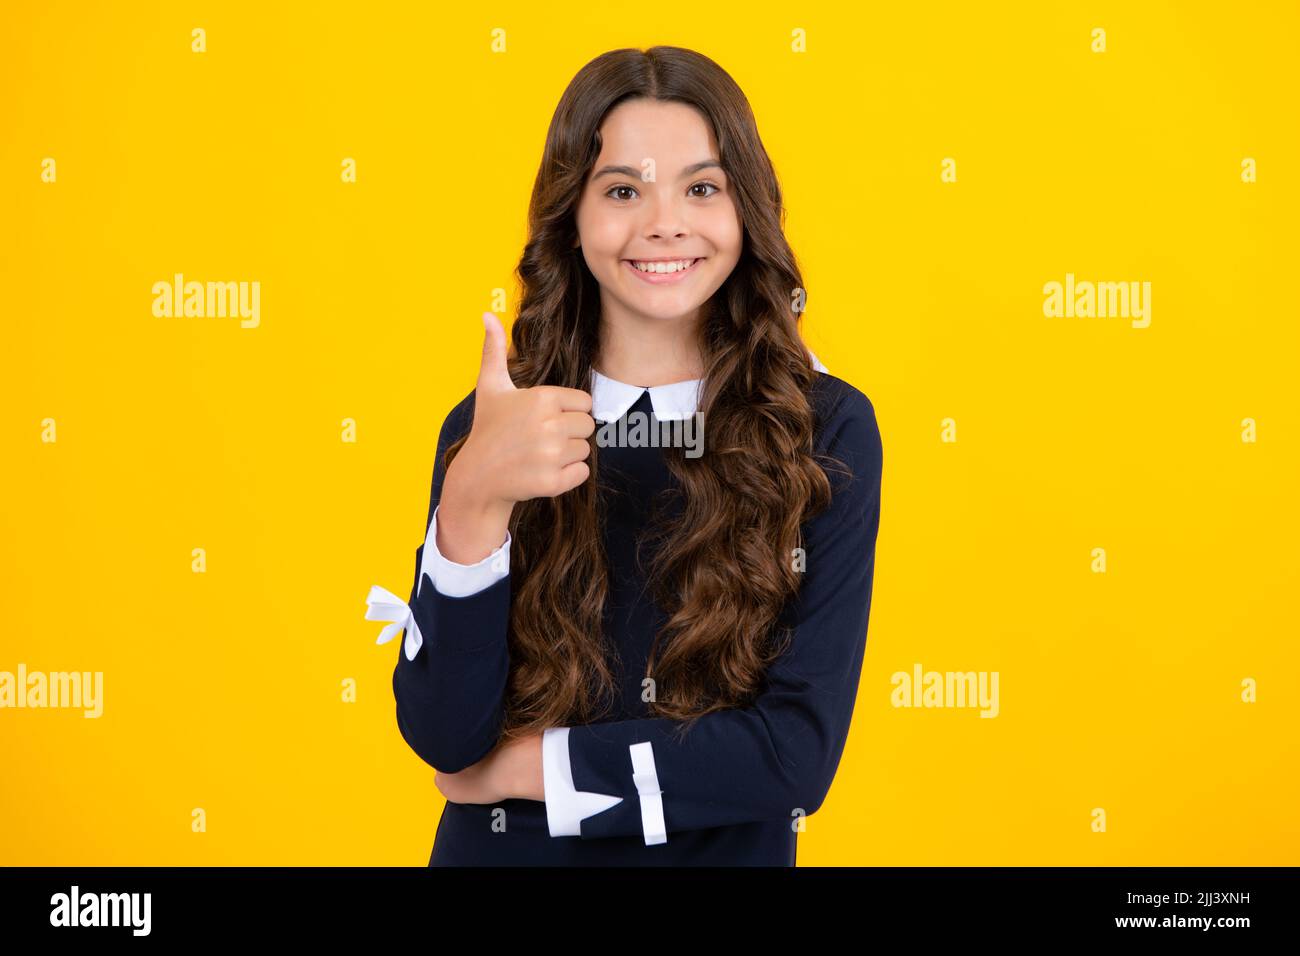 Happy casual teenager child girl showing thumb up and smiling isolated on yellow background. Stock Photo